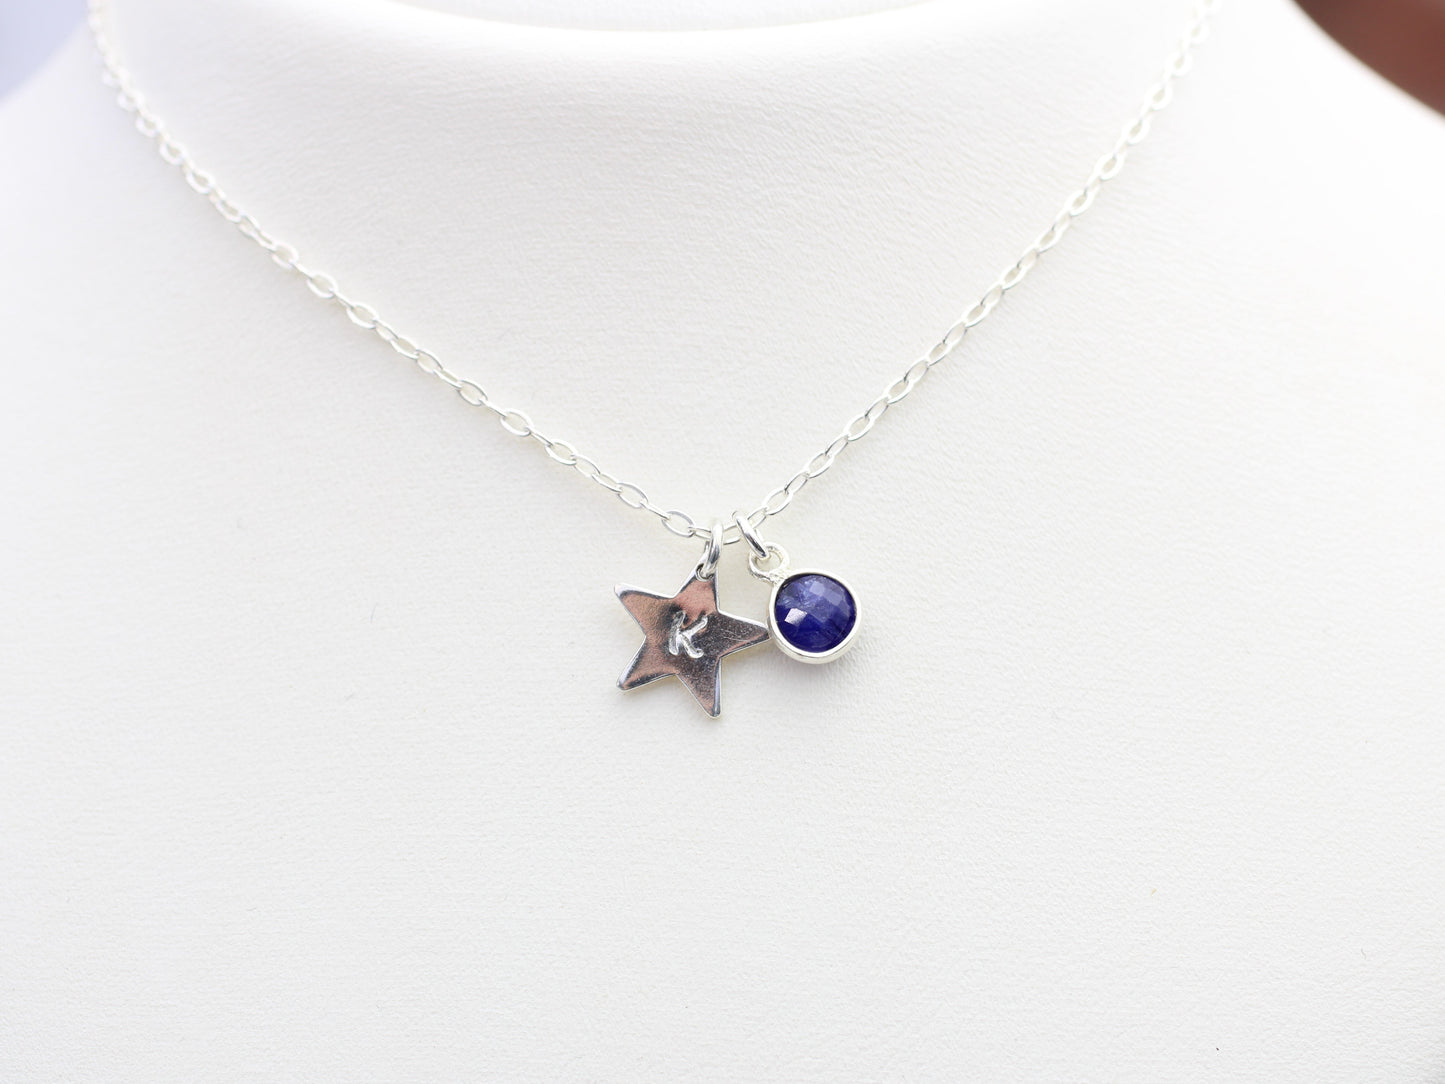 Star necklace in silver with optional birthstone charm.